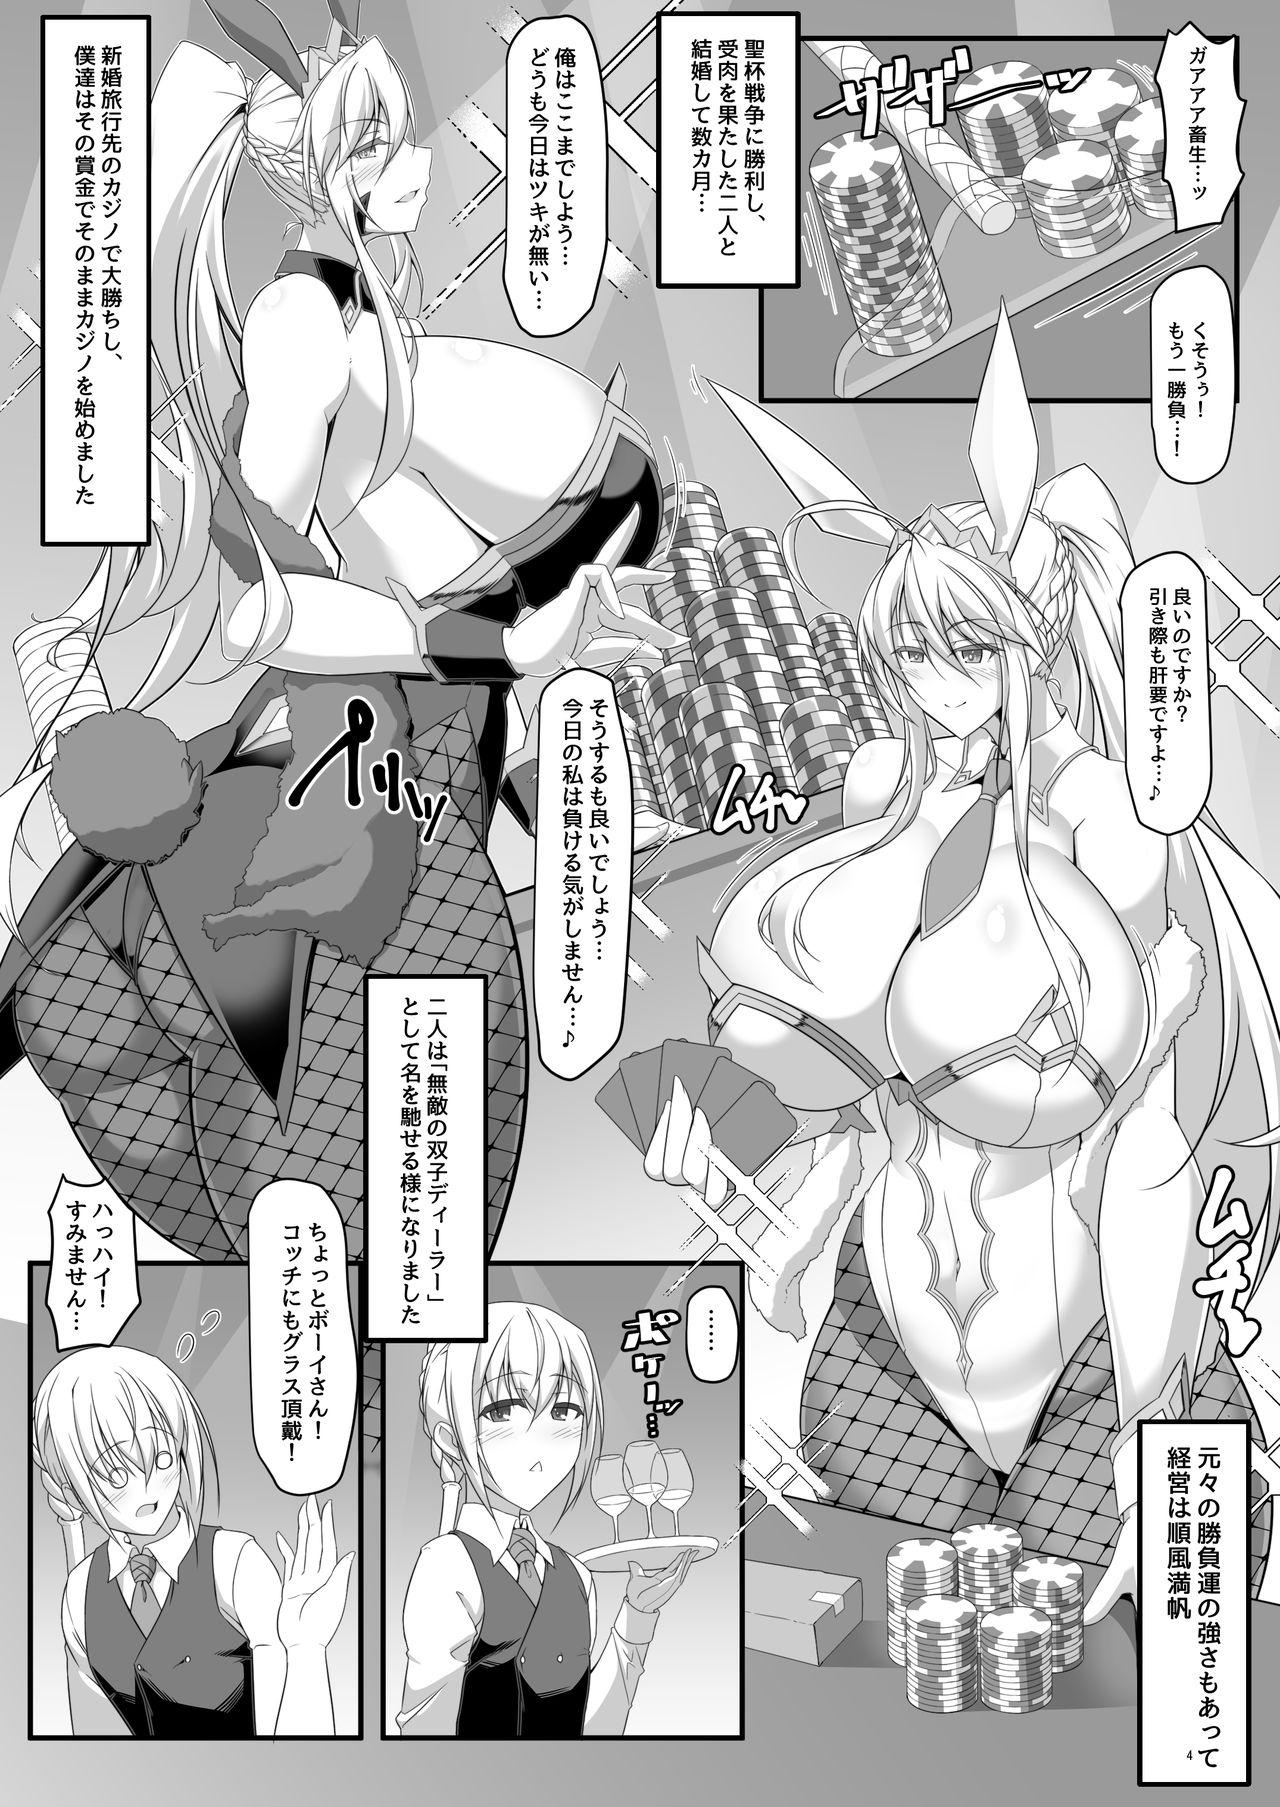 Cameltoe Souou to Maguau II - Fate grand order Culo Grande - Page 4